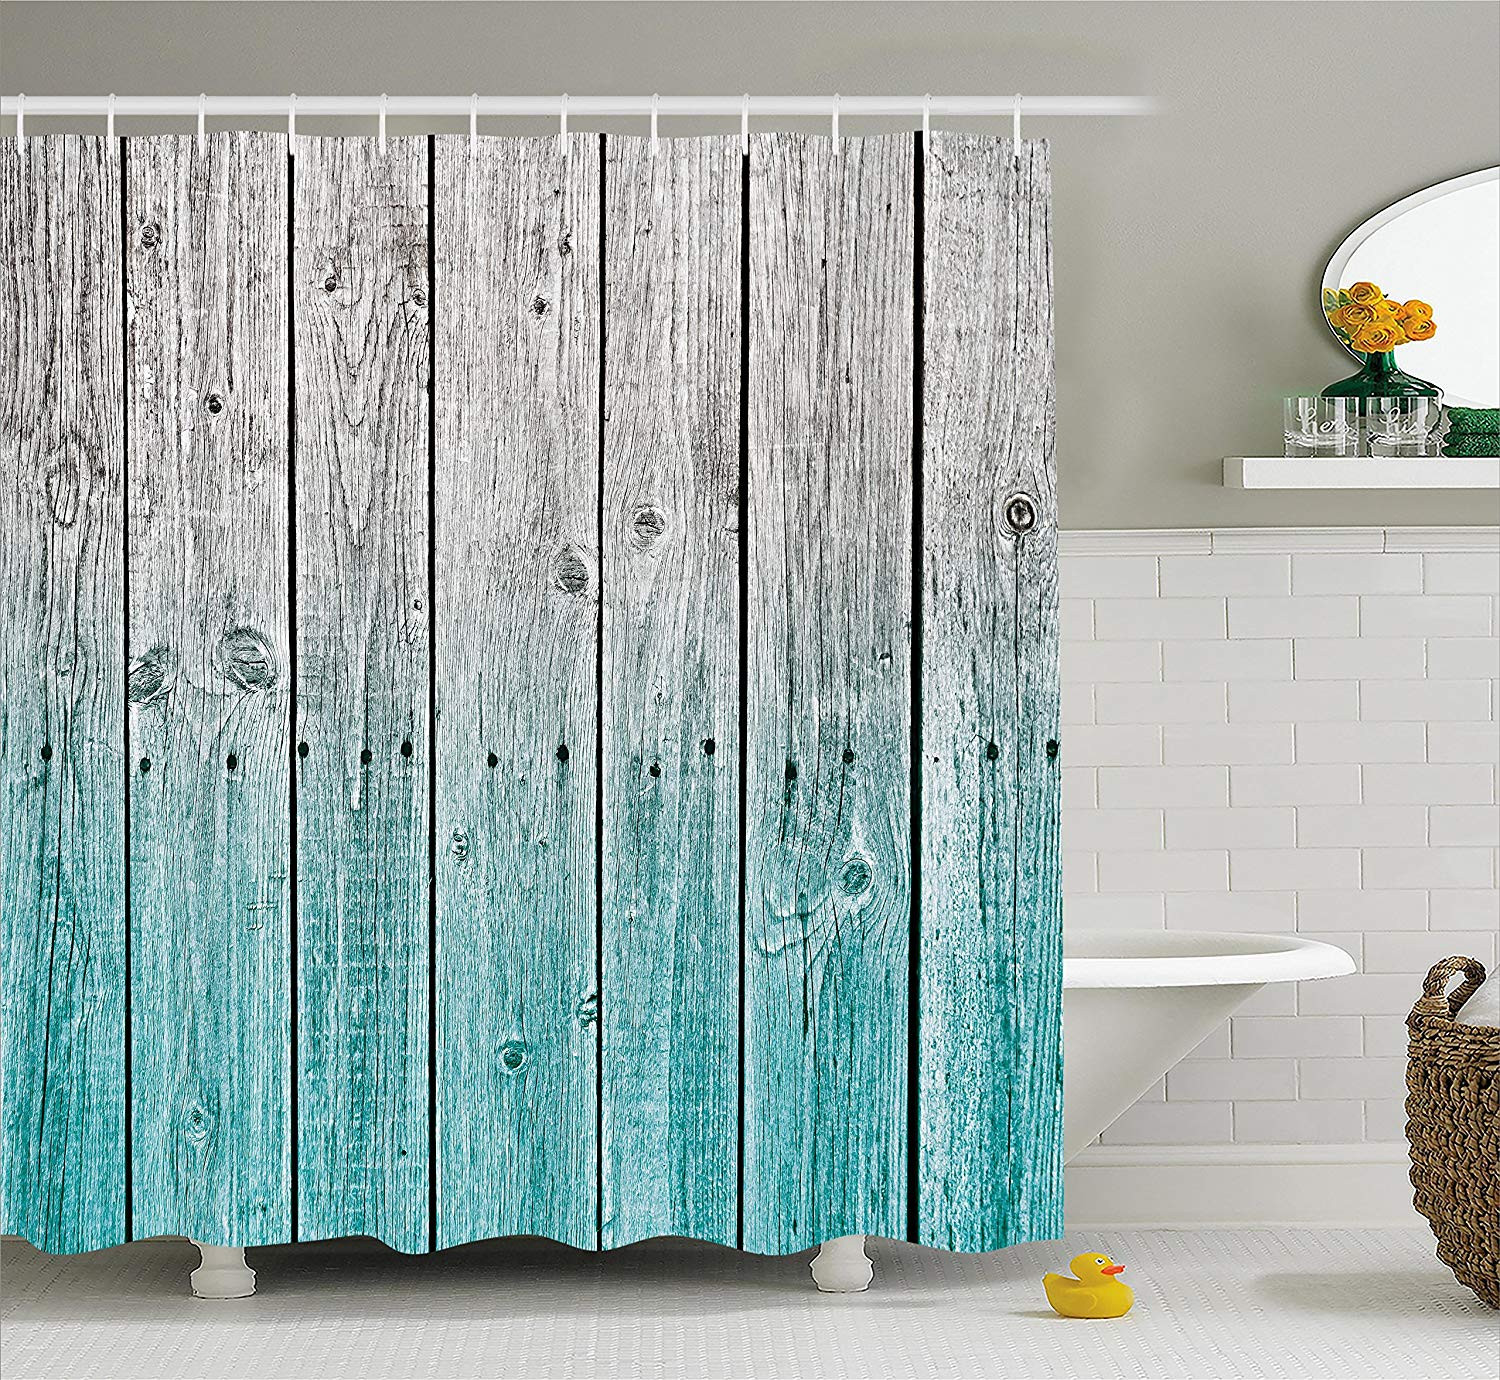 Country Bathroom Shower Curtains
 Rustic Shower Curtain Wood Panels Background with Digital